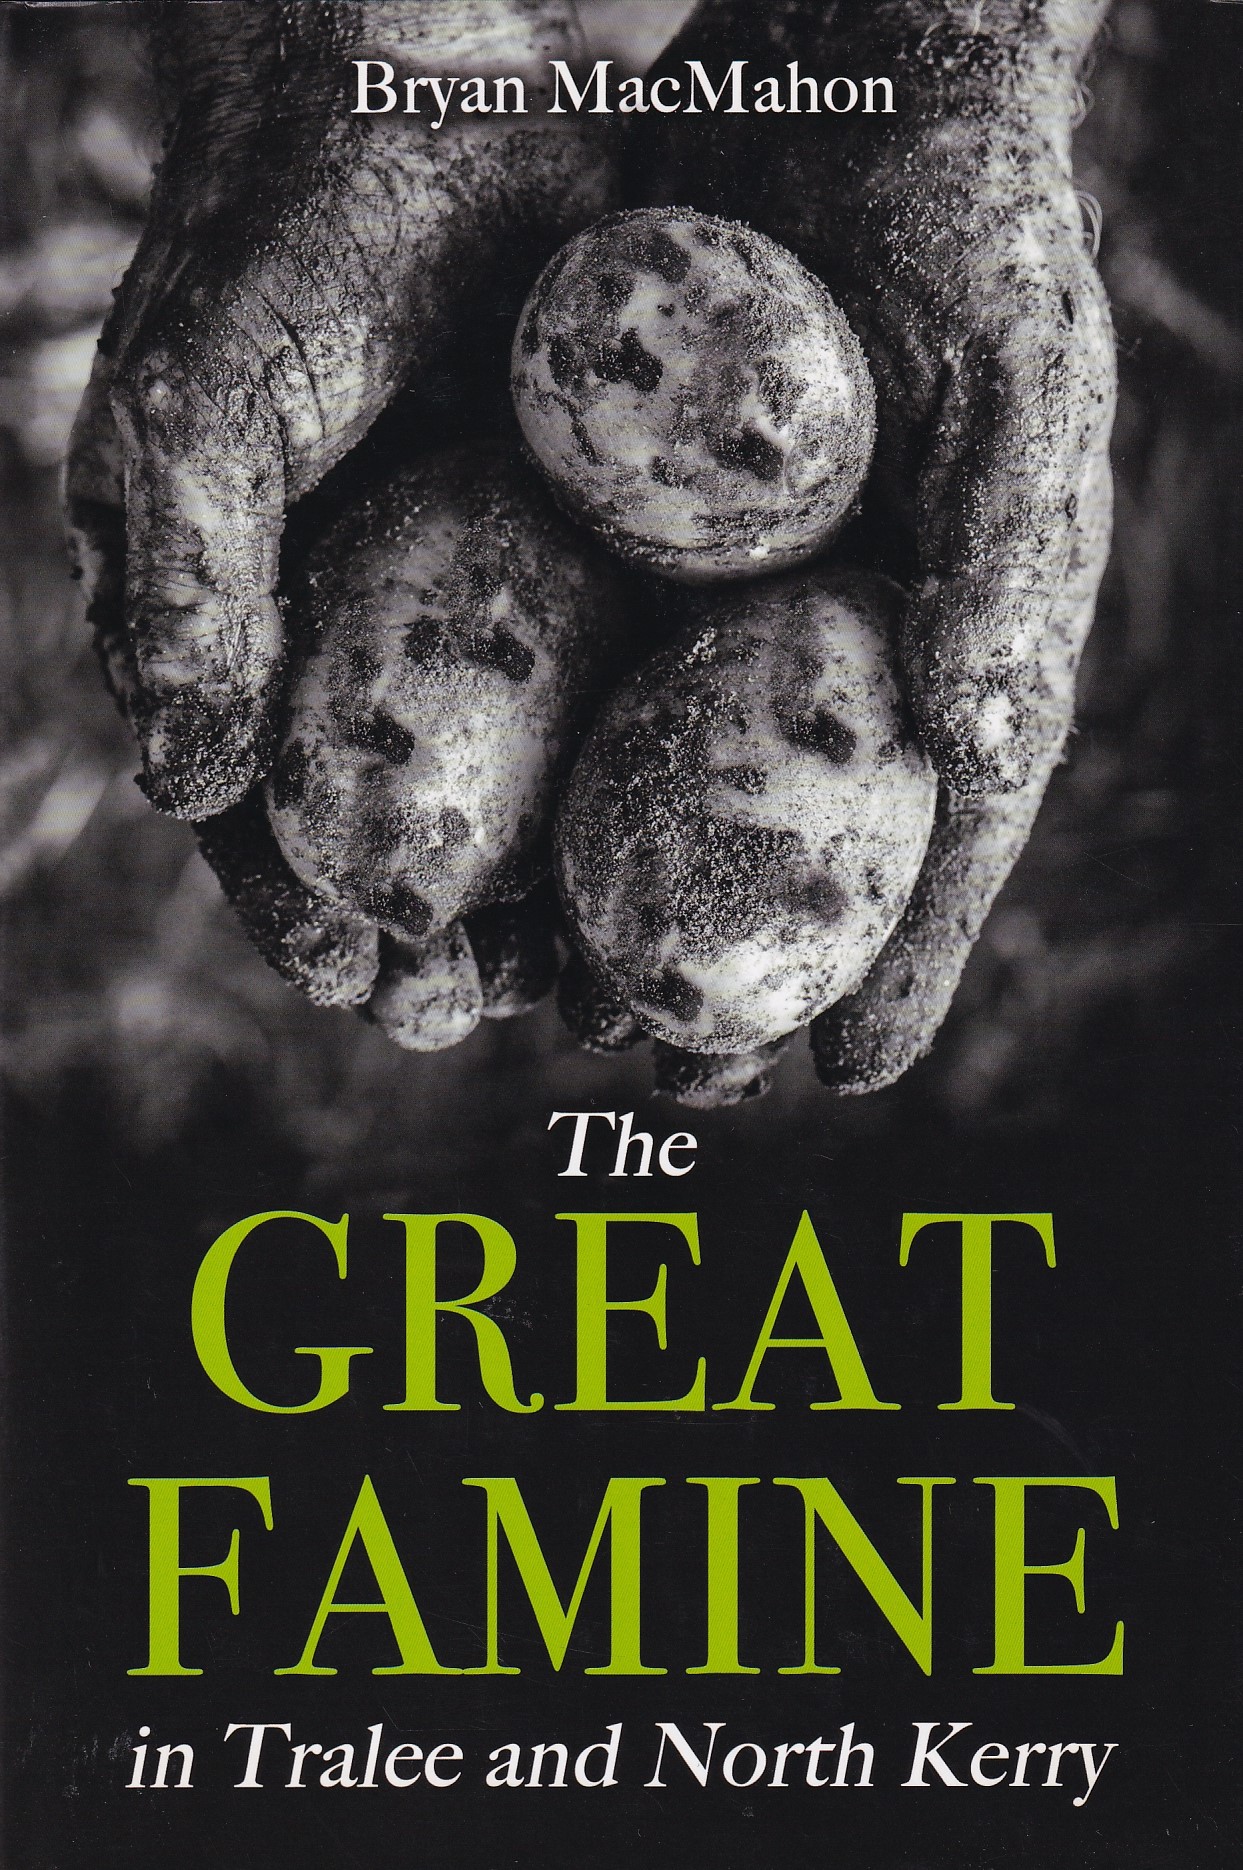 The Great Famine in Tralee and North Kerry | Bryan MacMahon | Charlie Byrne's